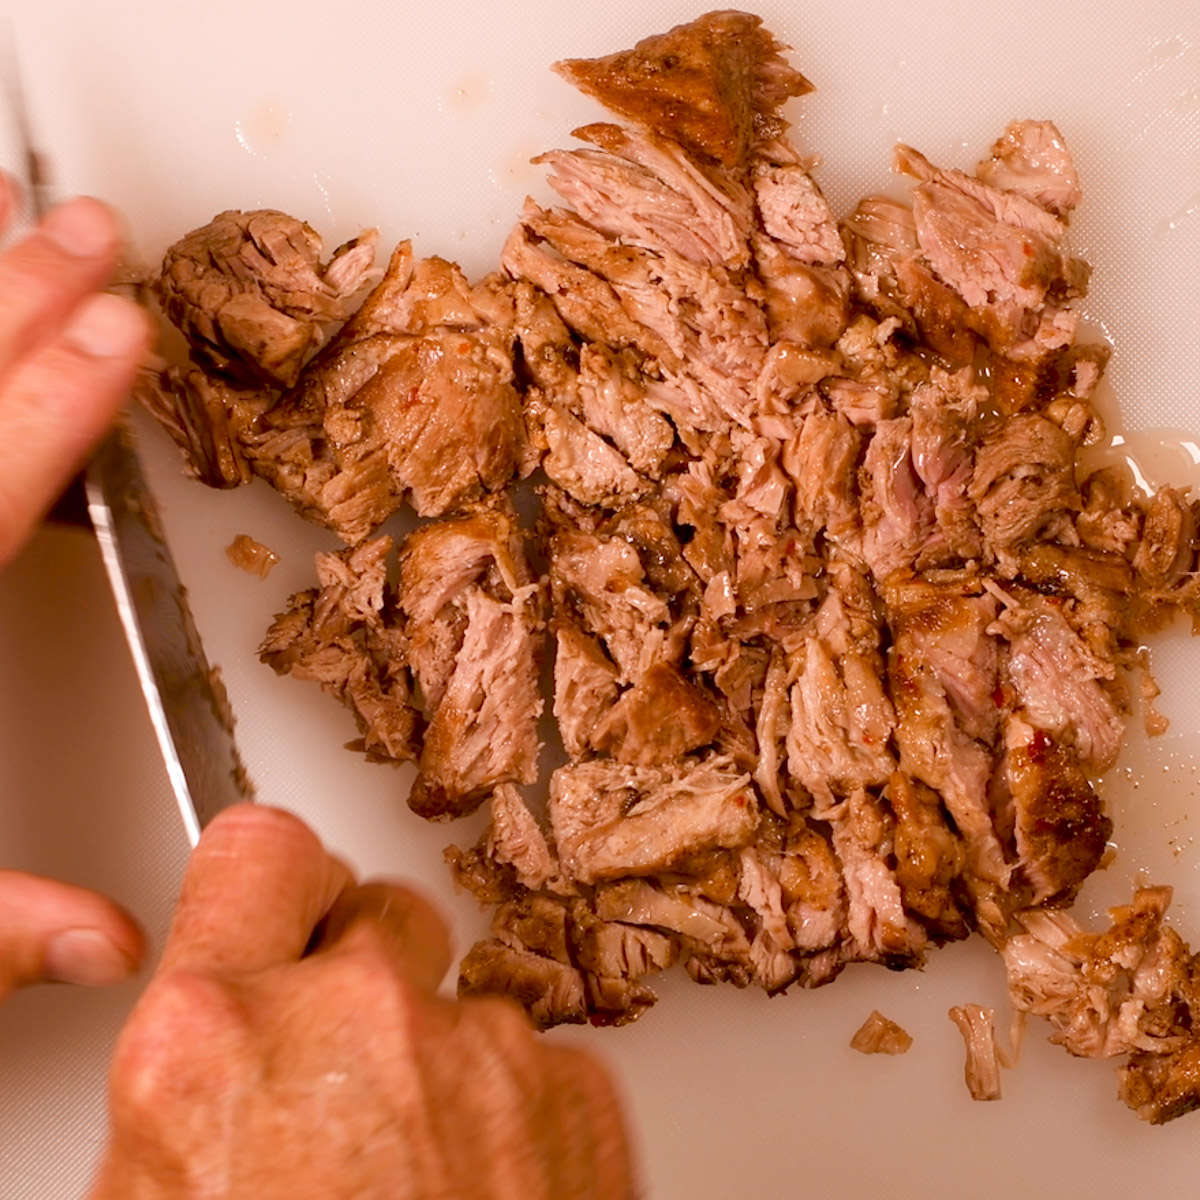 Chop some of the carnitas meat.